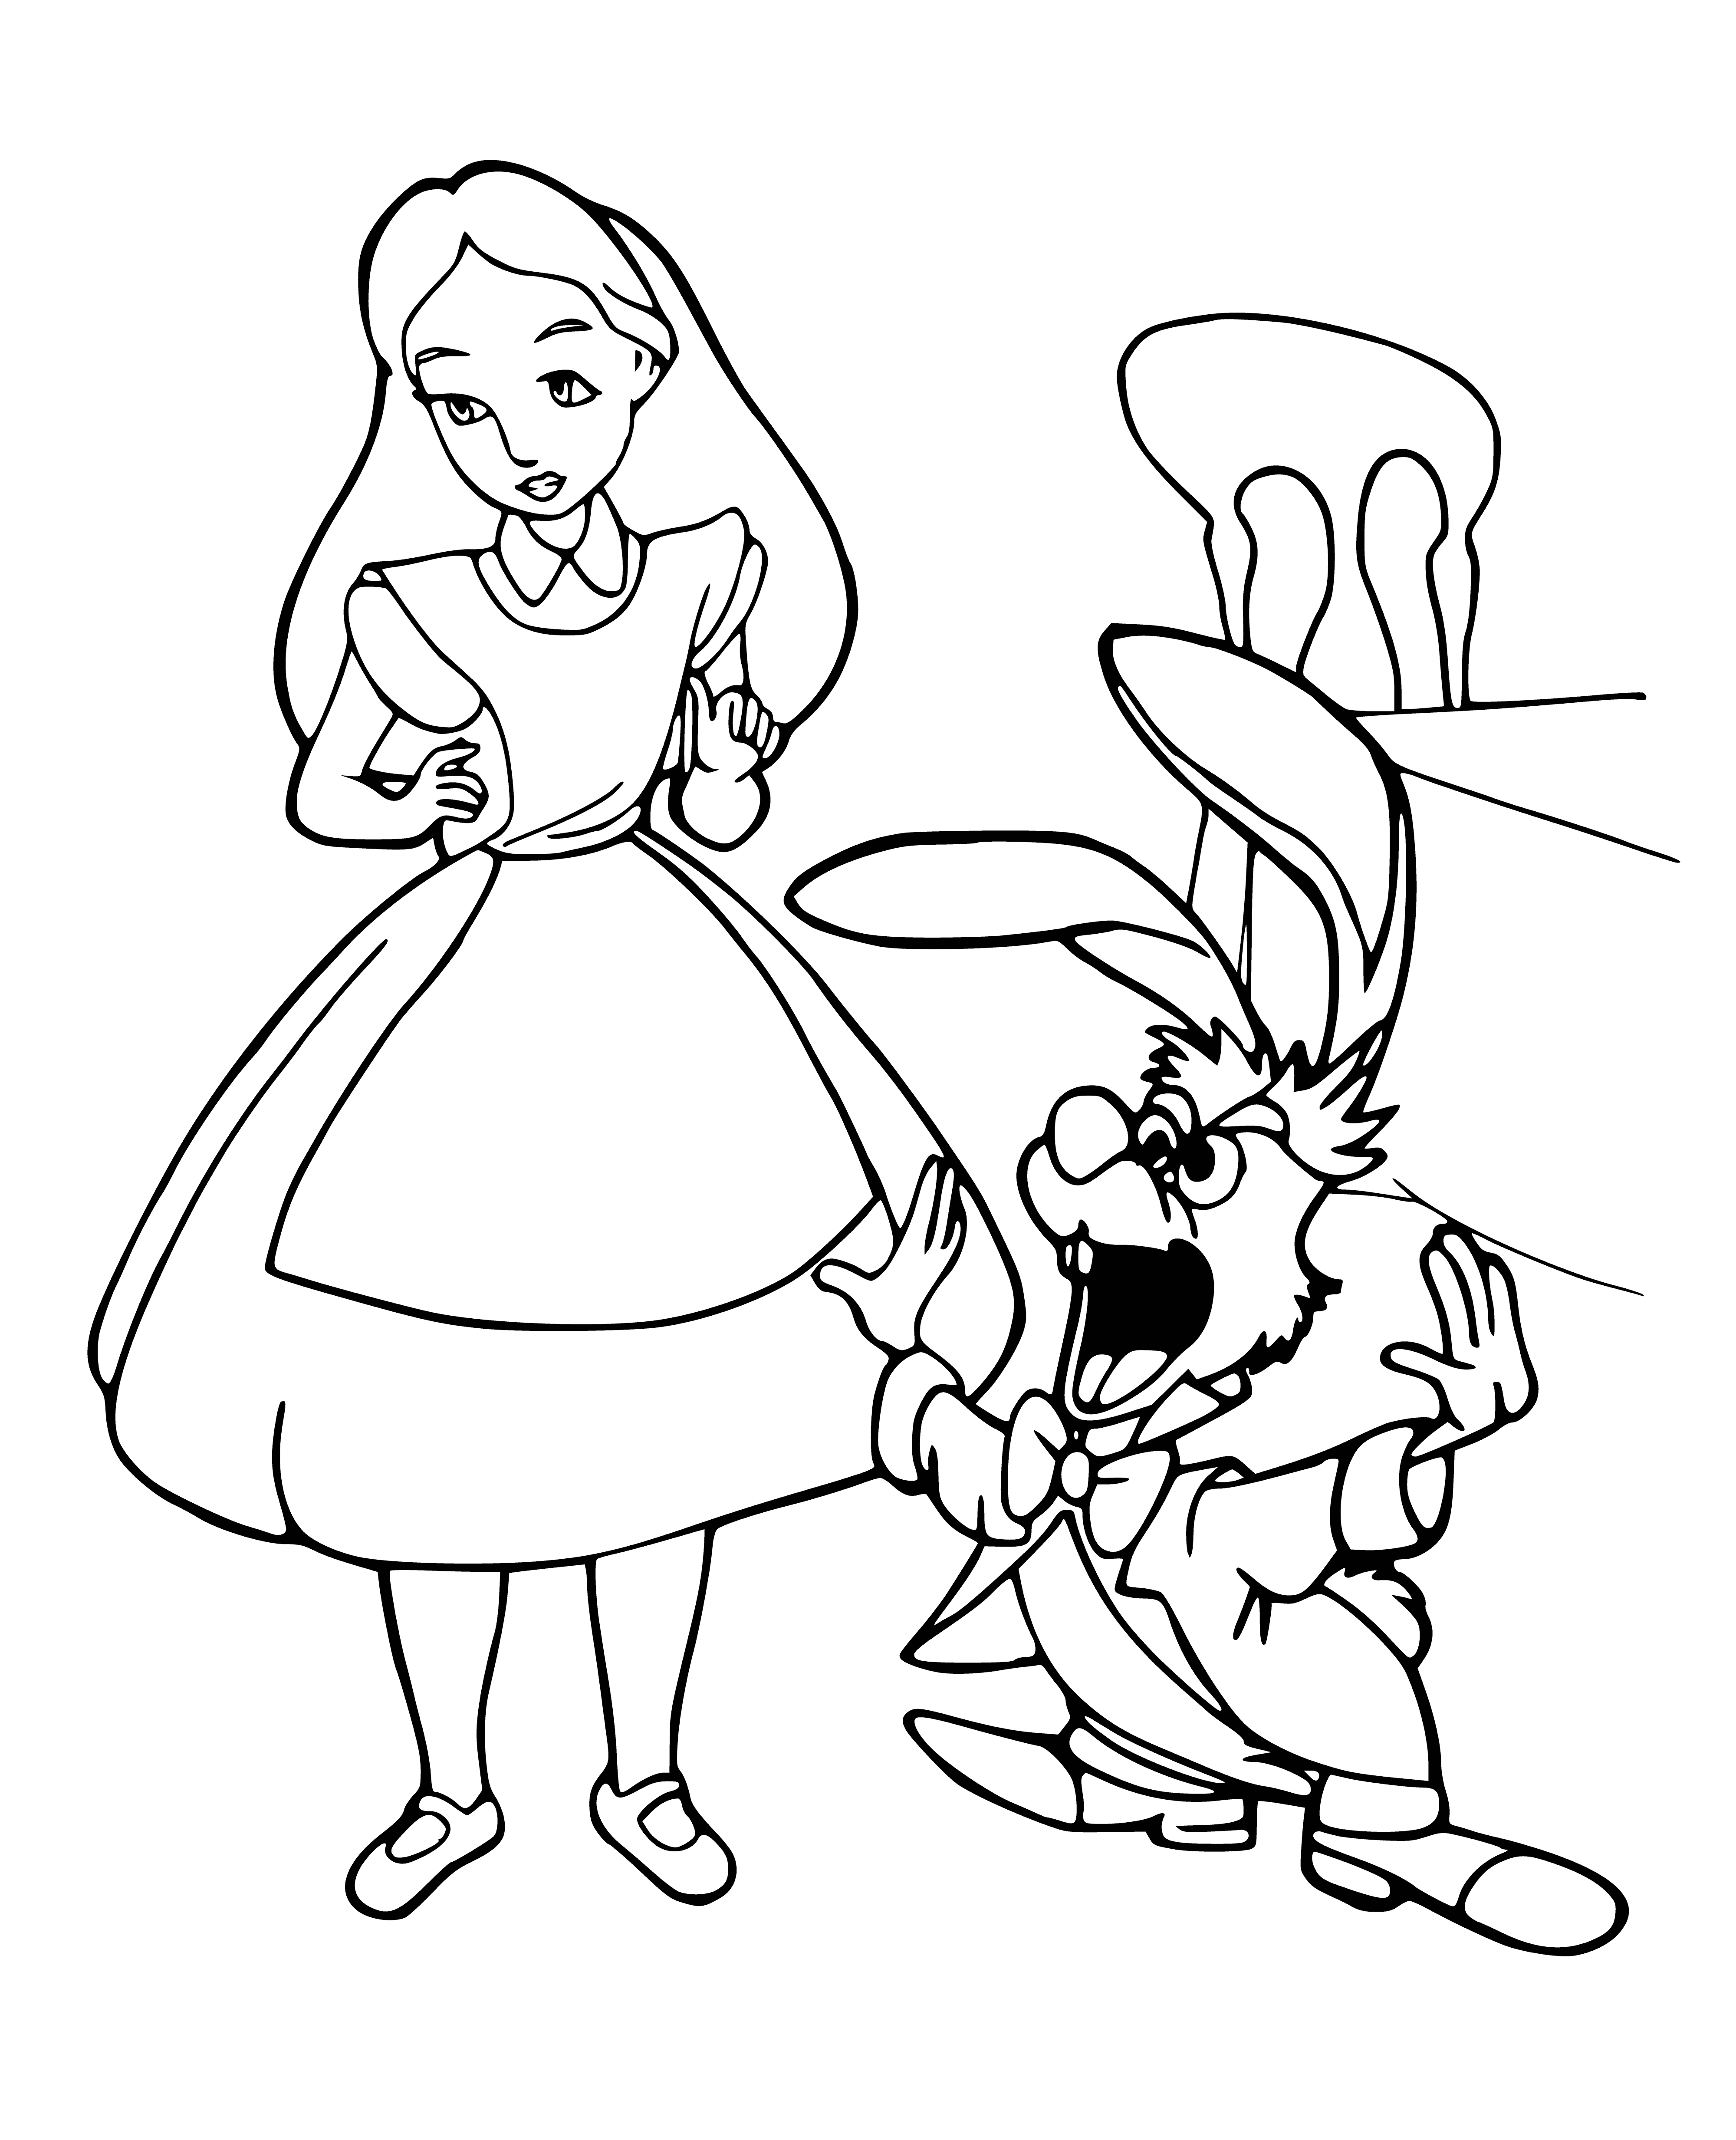 Alice and the March Hare coloring page